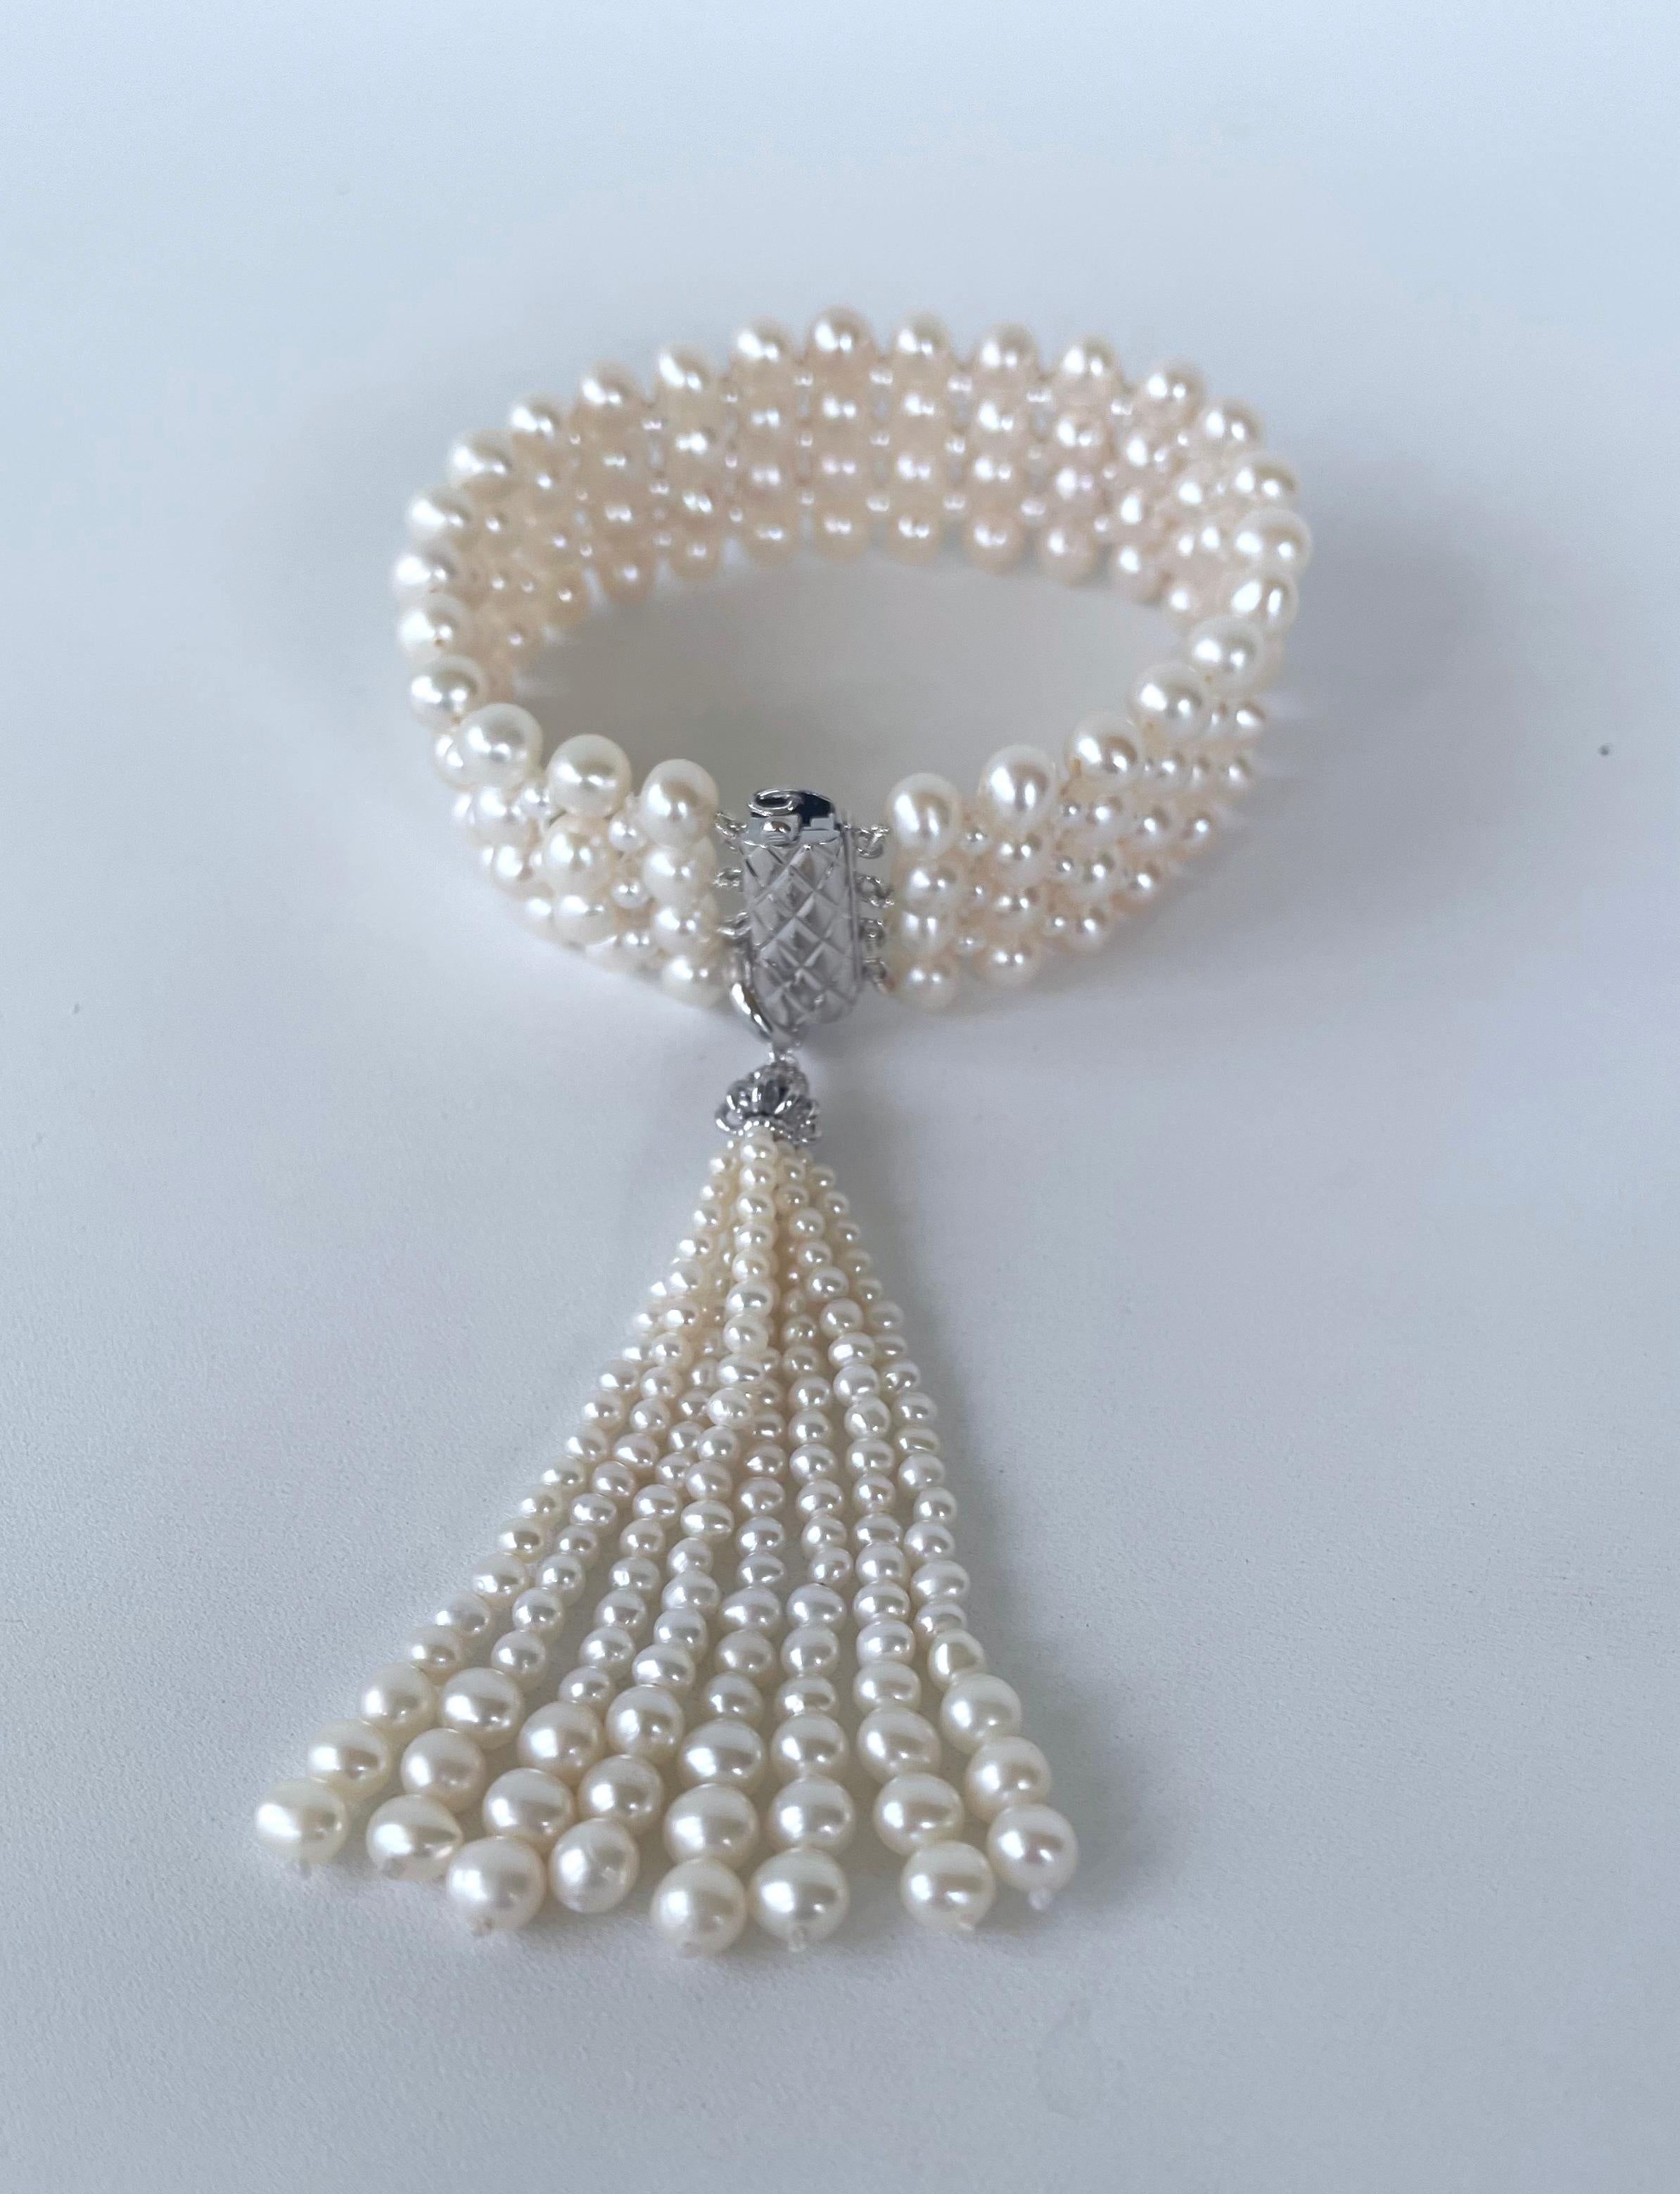 Gorgeous 1920's Art Deco Inspired bracelet by Marina J. This stunning piece features all Cultured Pearls intricately woven together into a tight lace like design. Measuring 7.5 inches long, the lace woven band meets at a decorative Silver Rhodium